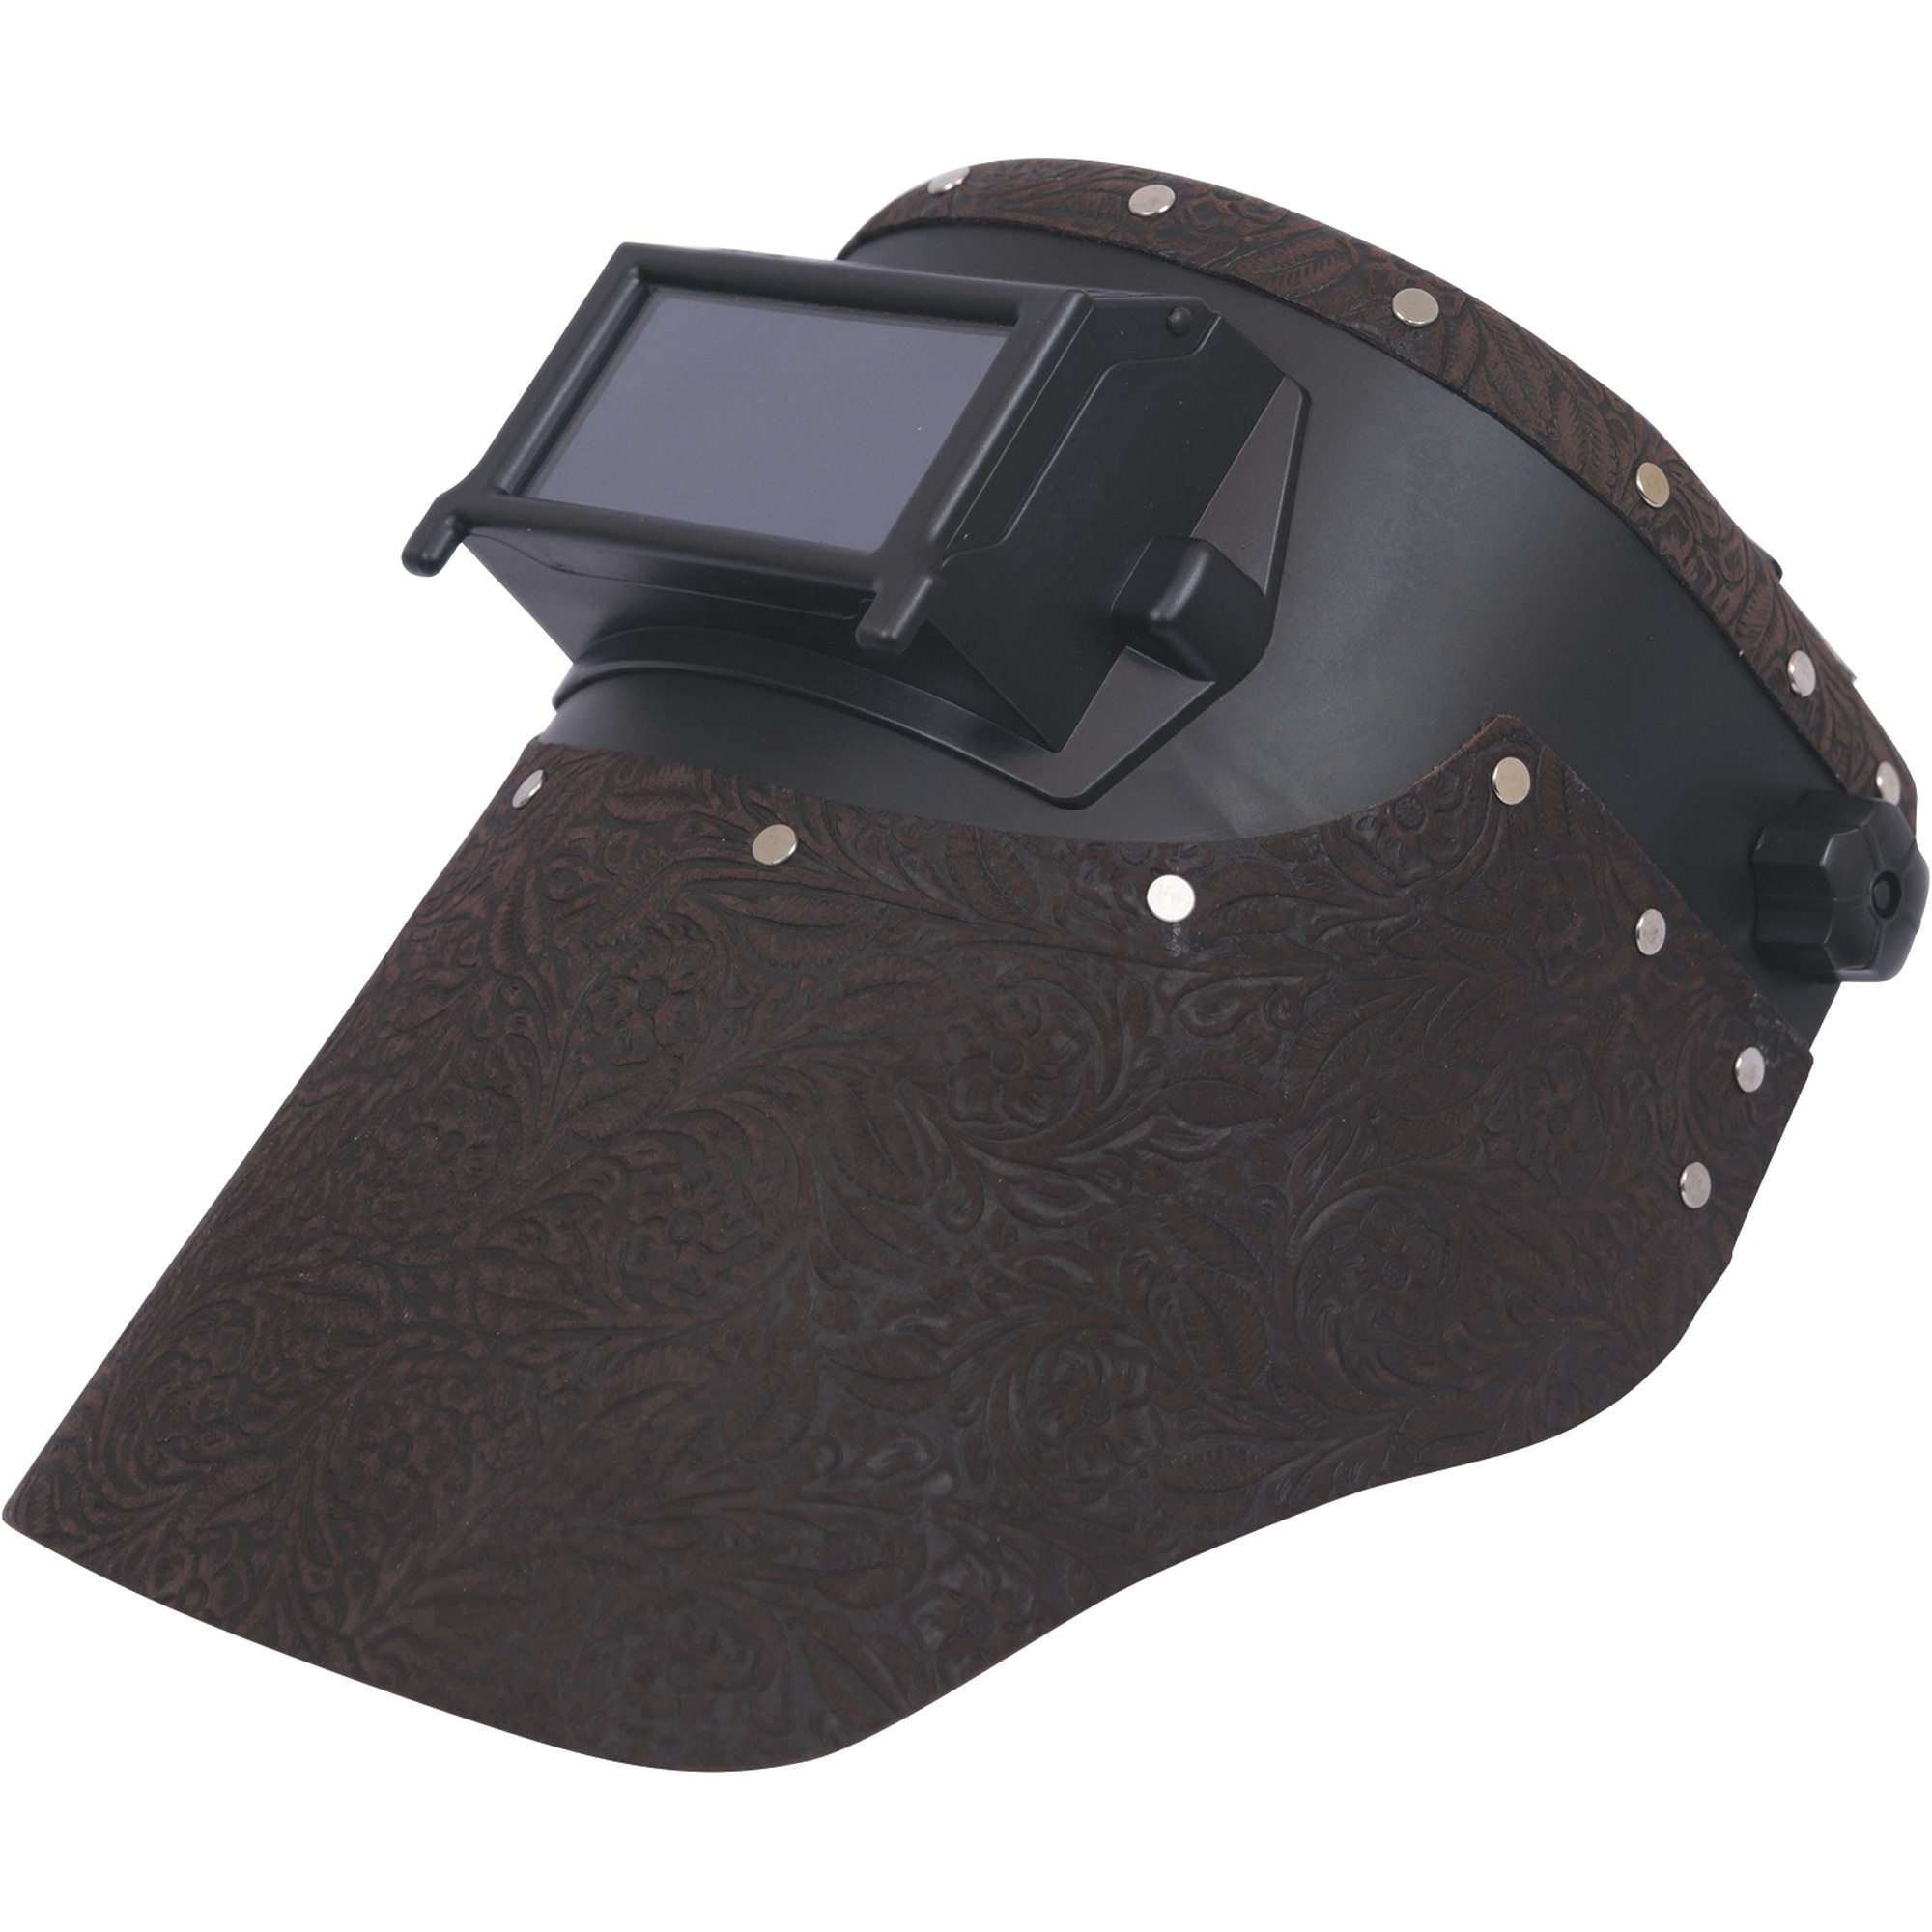 Outlaw Leather Welding Hood with Shade 10 â 2Inch x 4 1/4Inch Filter, Brown Floral, Model OL-BRFS-101